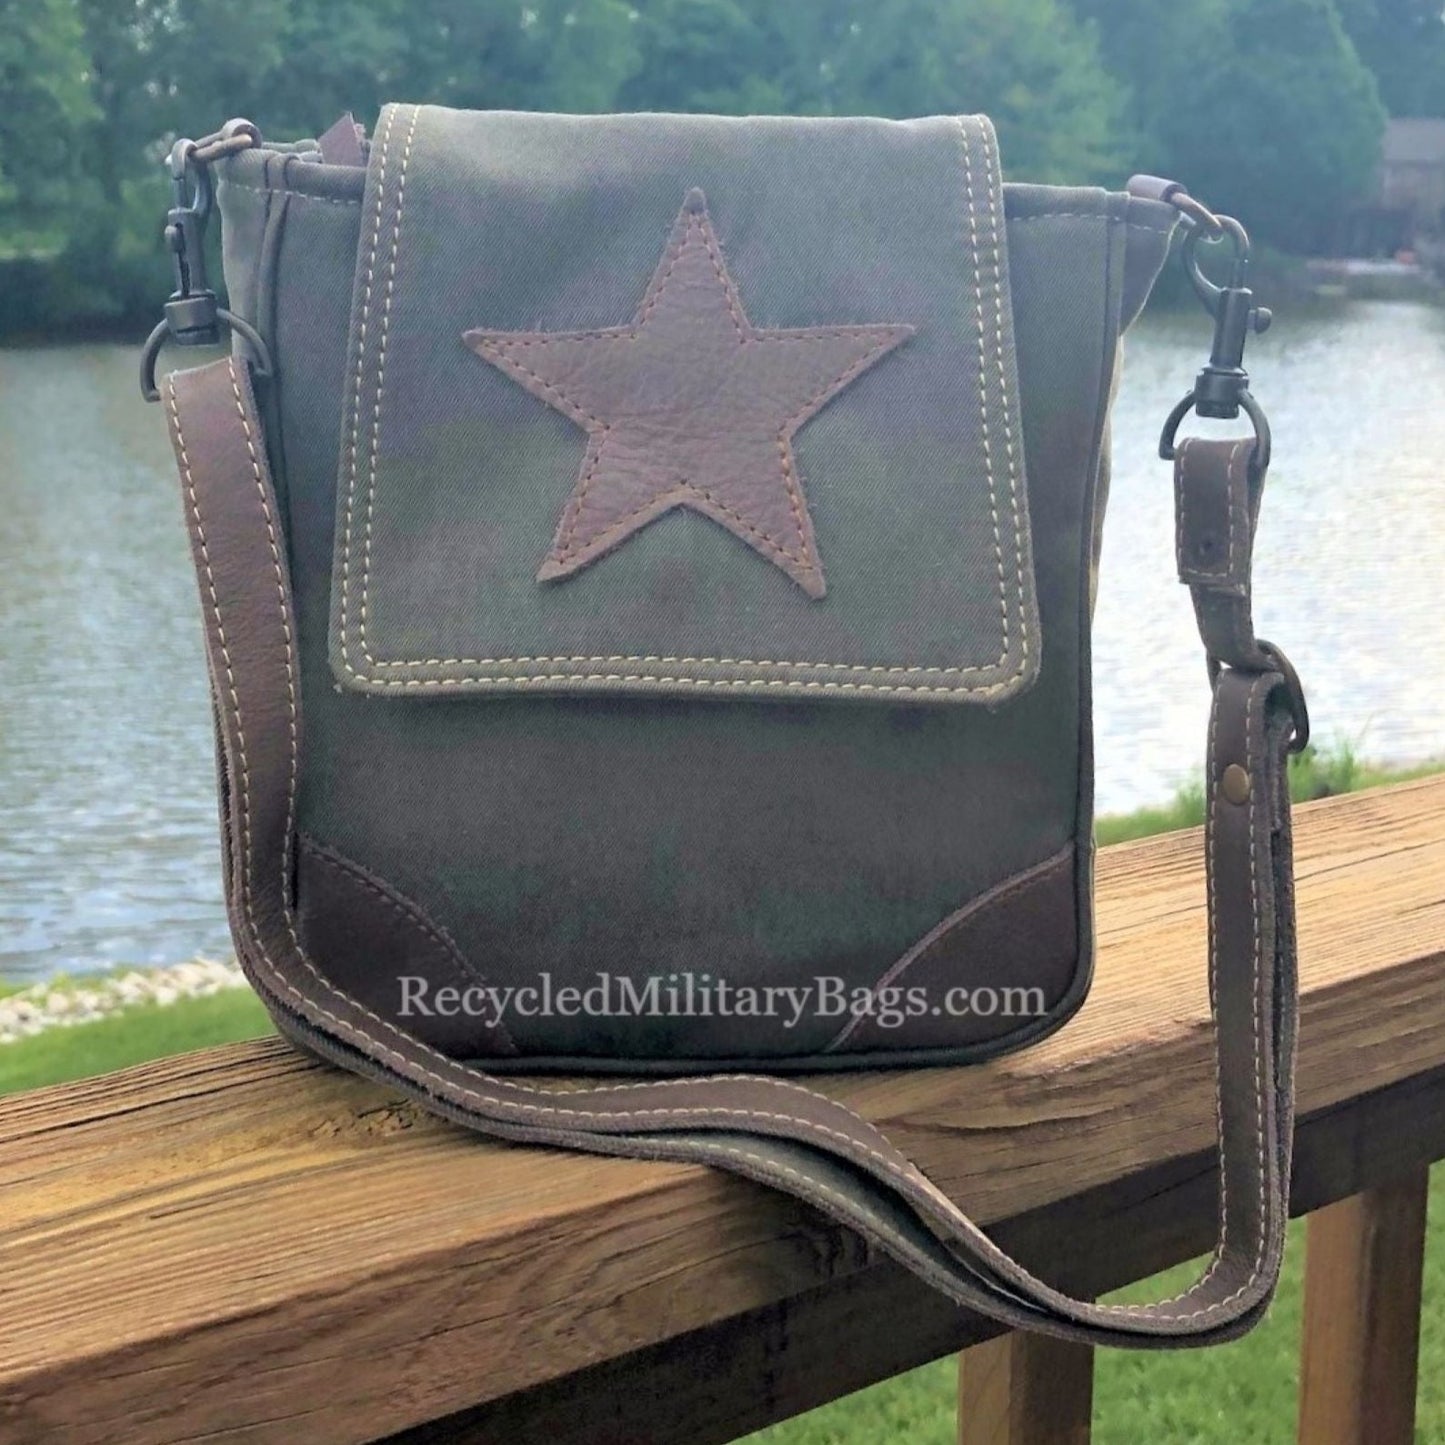 Small Green Crossbody Bag with Leather Star   ~  Great Small Travel Bag or Gift for Army Mom or Wife